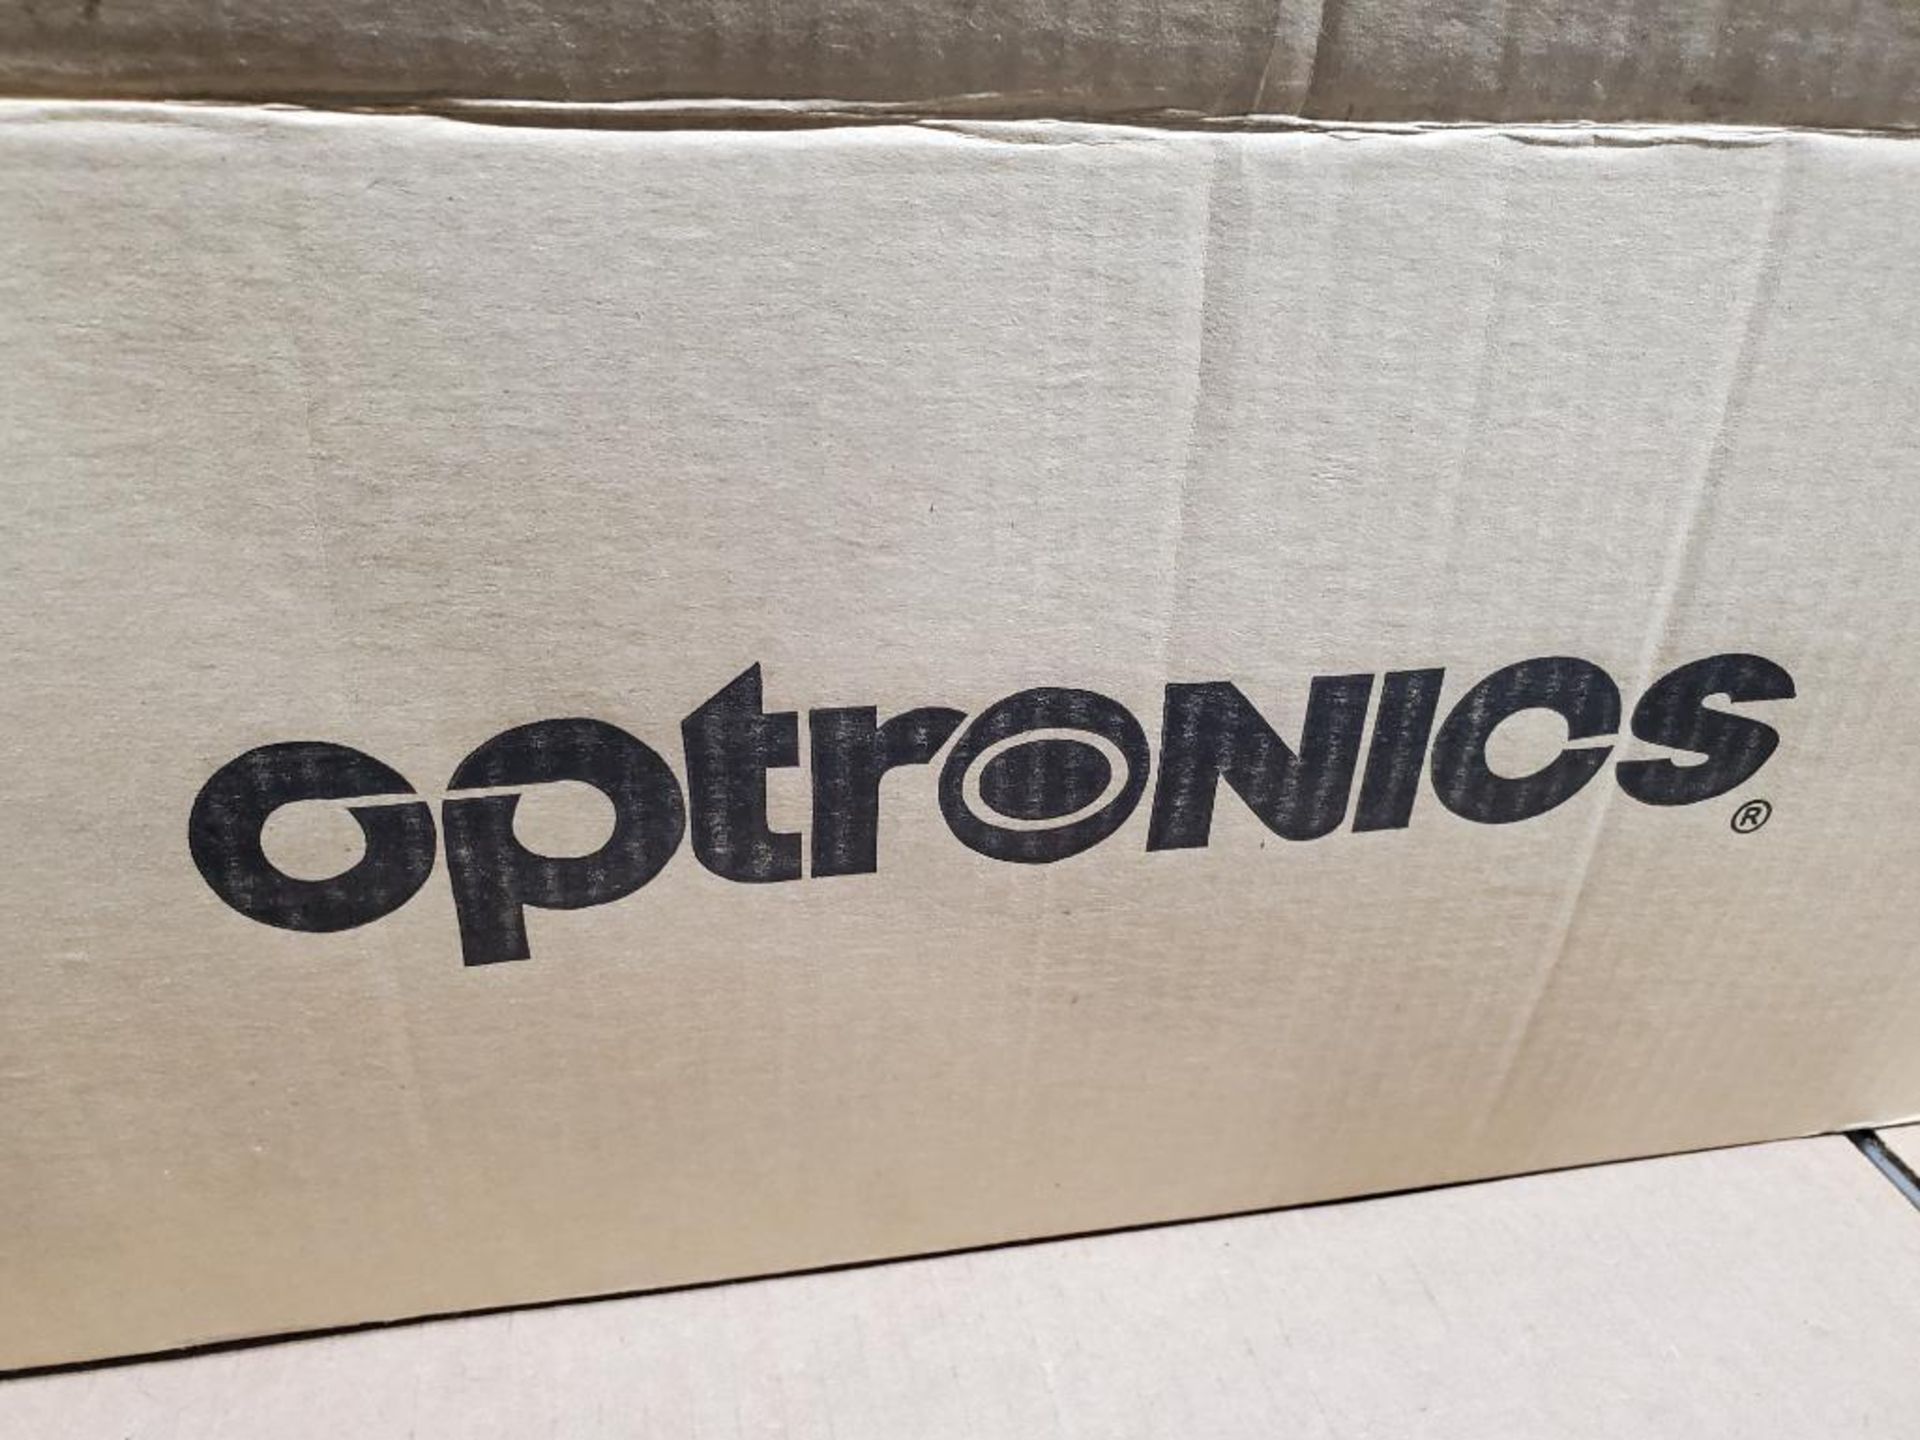 Qty 5 - Optronics light. Part number 17304030. - Image 4 of 5